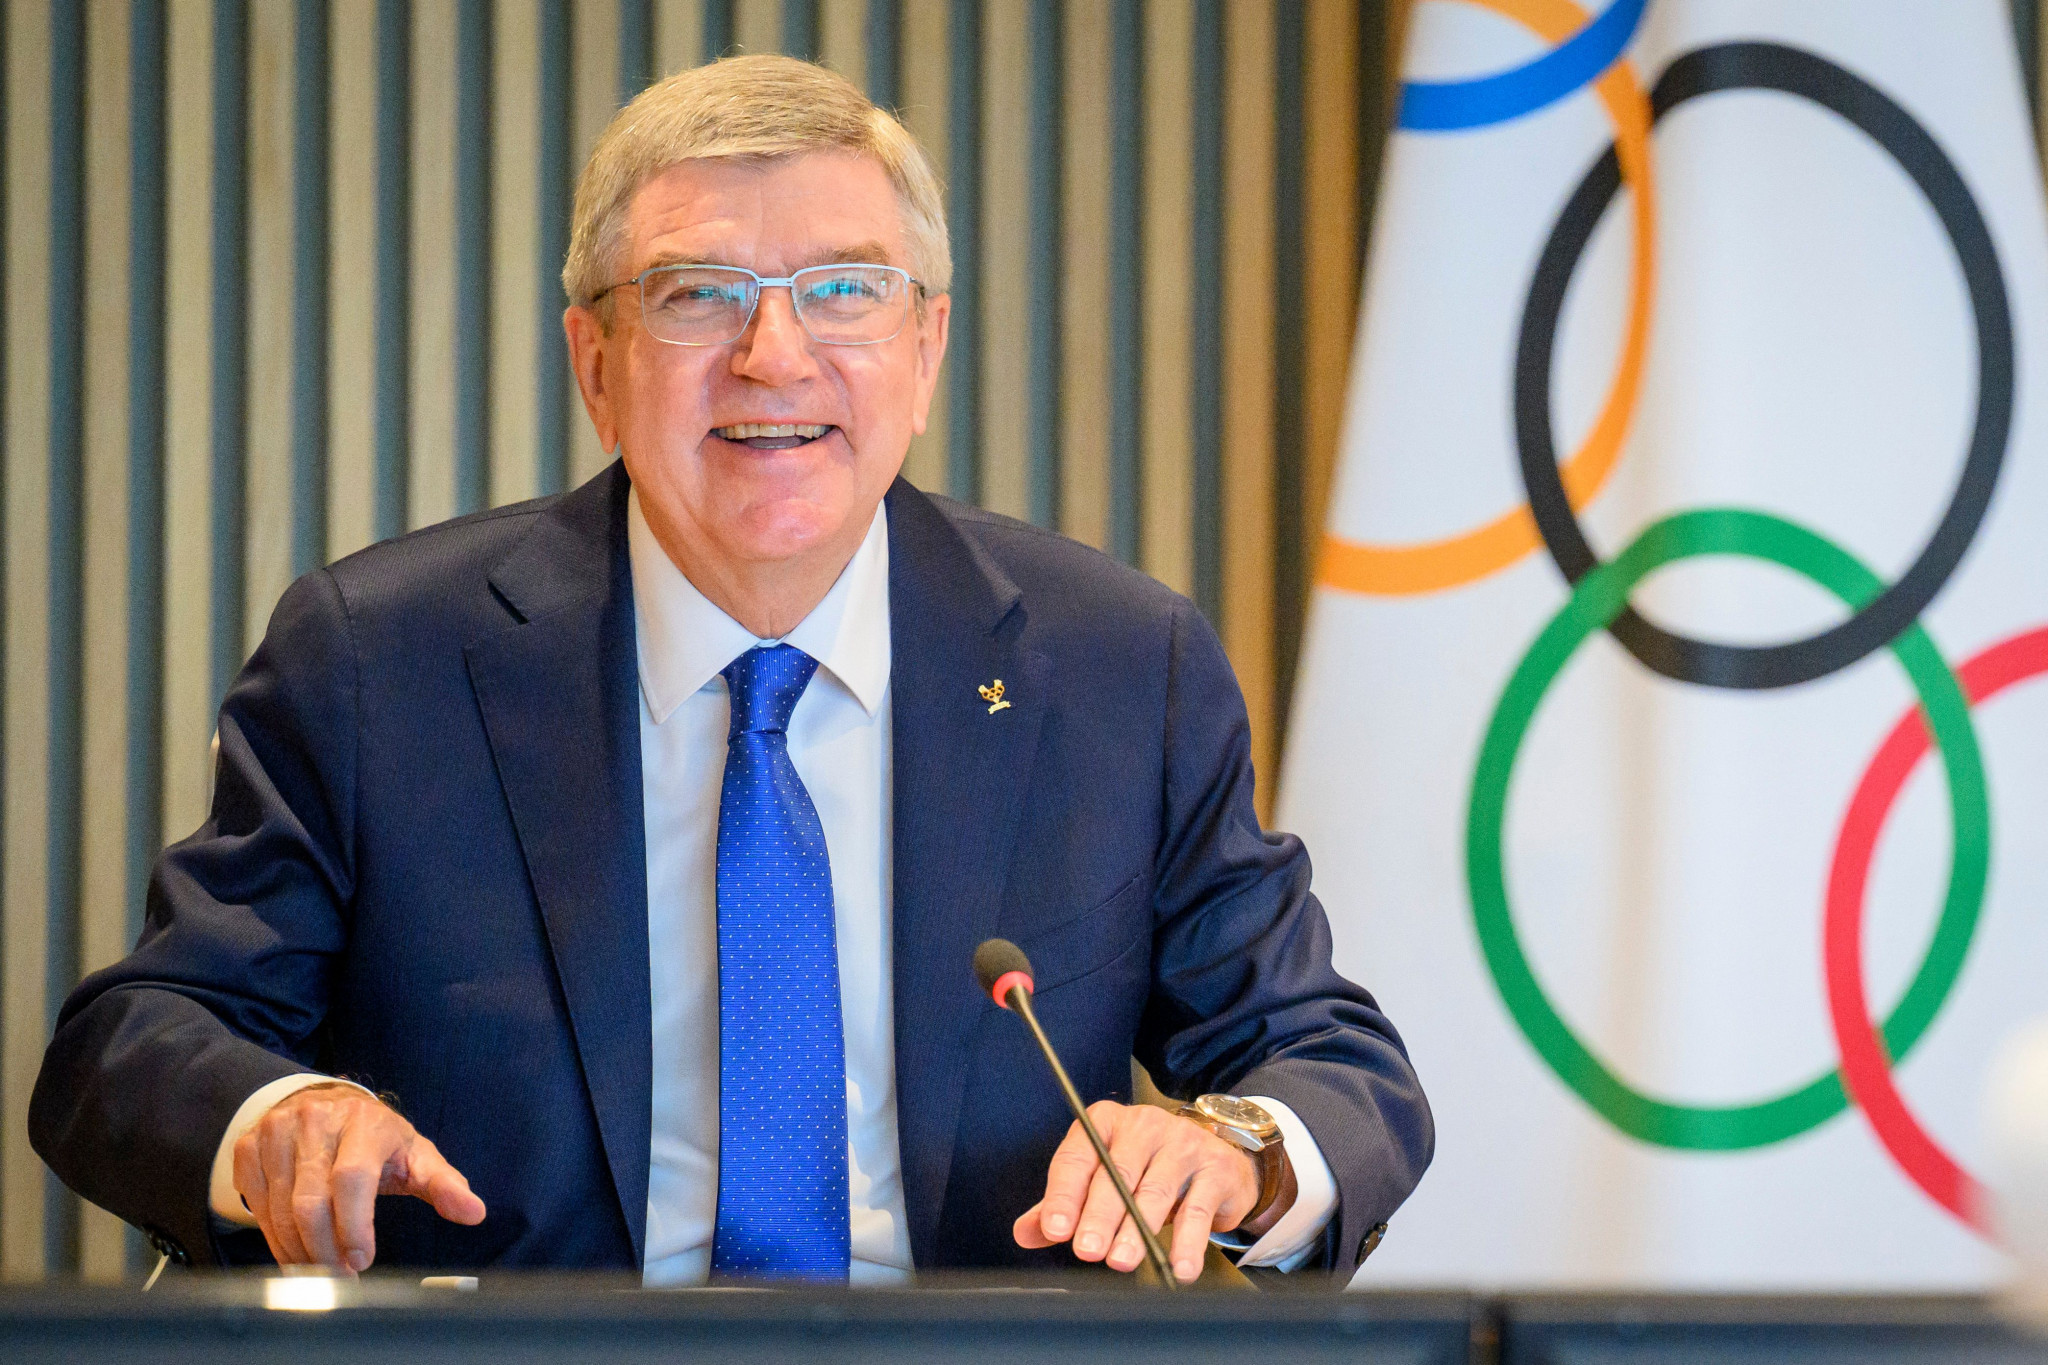 Thomas Bach has backed Italy to deliver a successful Winter Olympics in 2026 despite challenges ©Getty Images